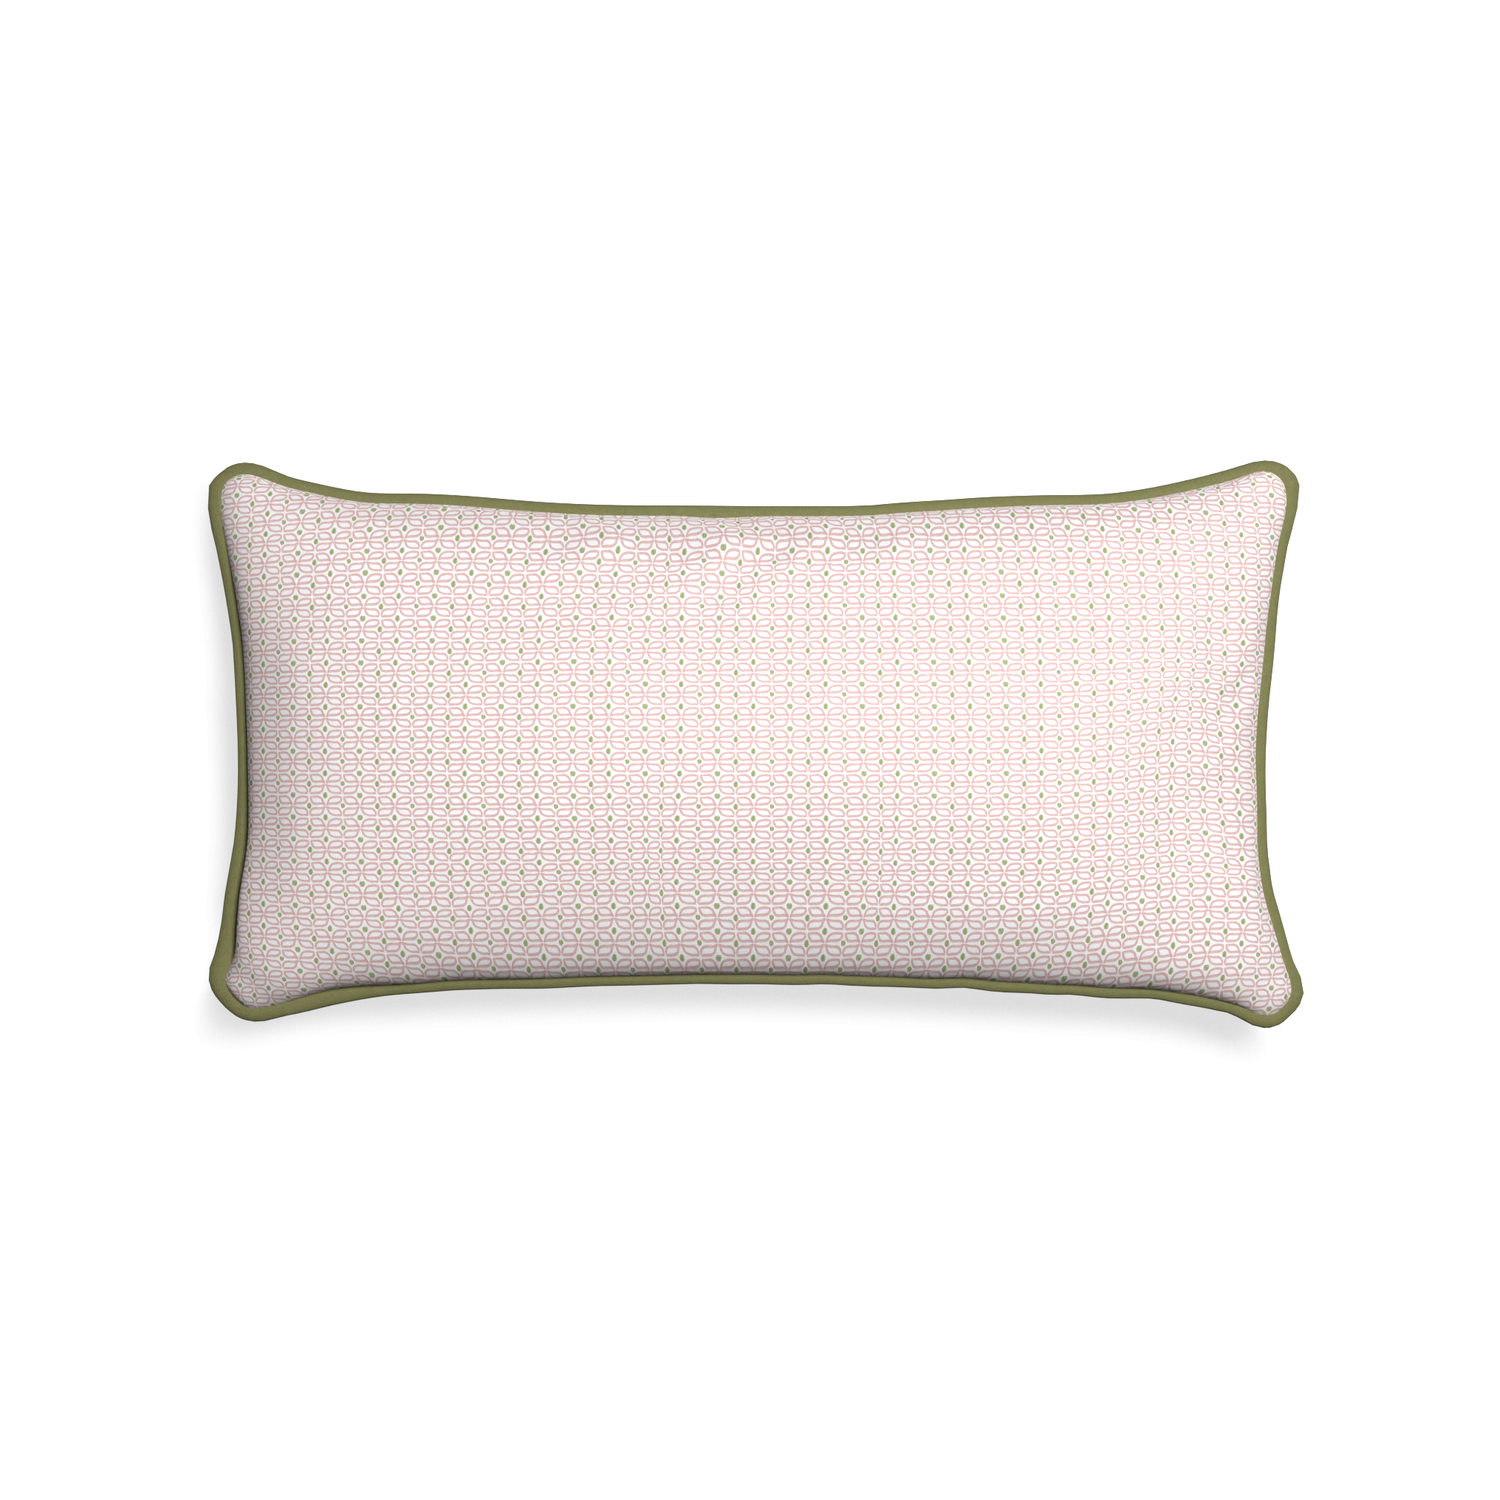 Midi-lumbar loomi pink custom pink geometricpillow with moss piping on white background